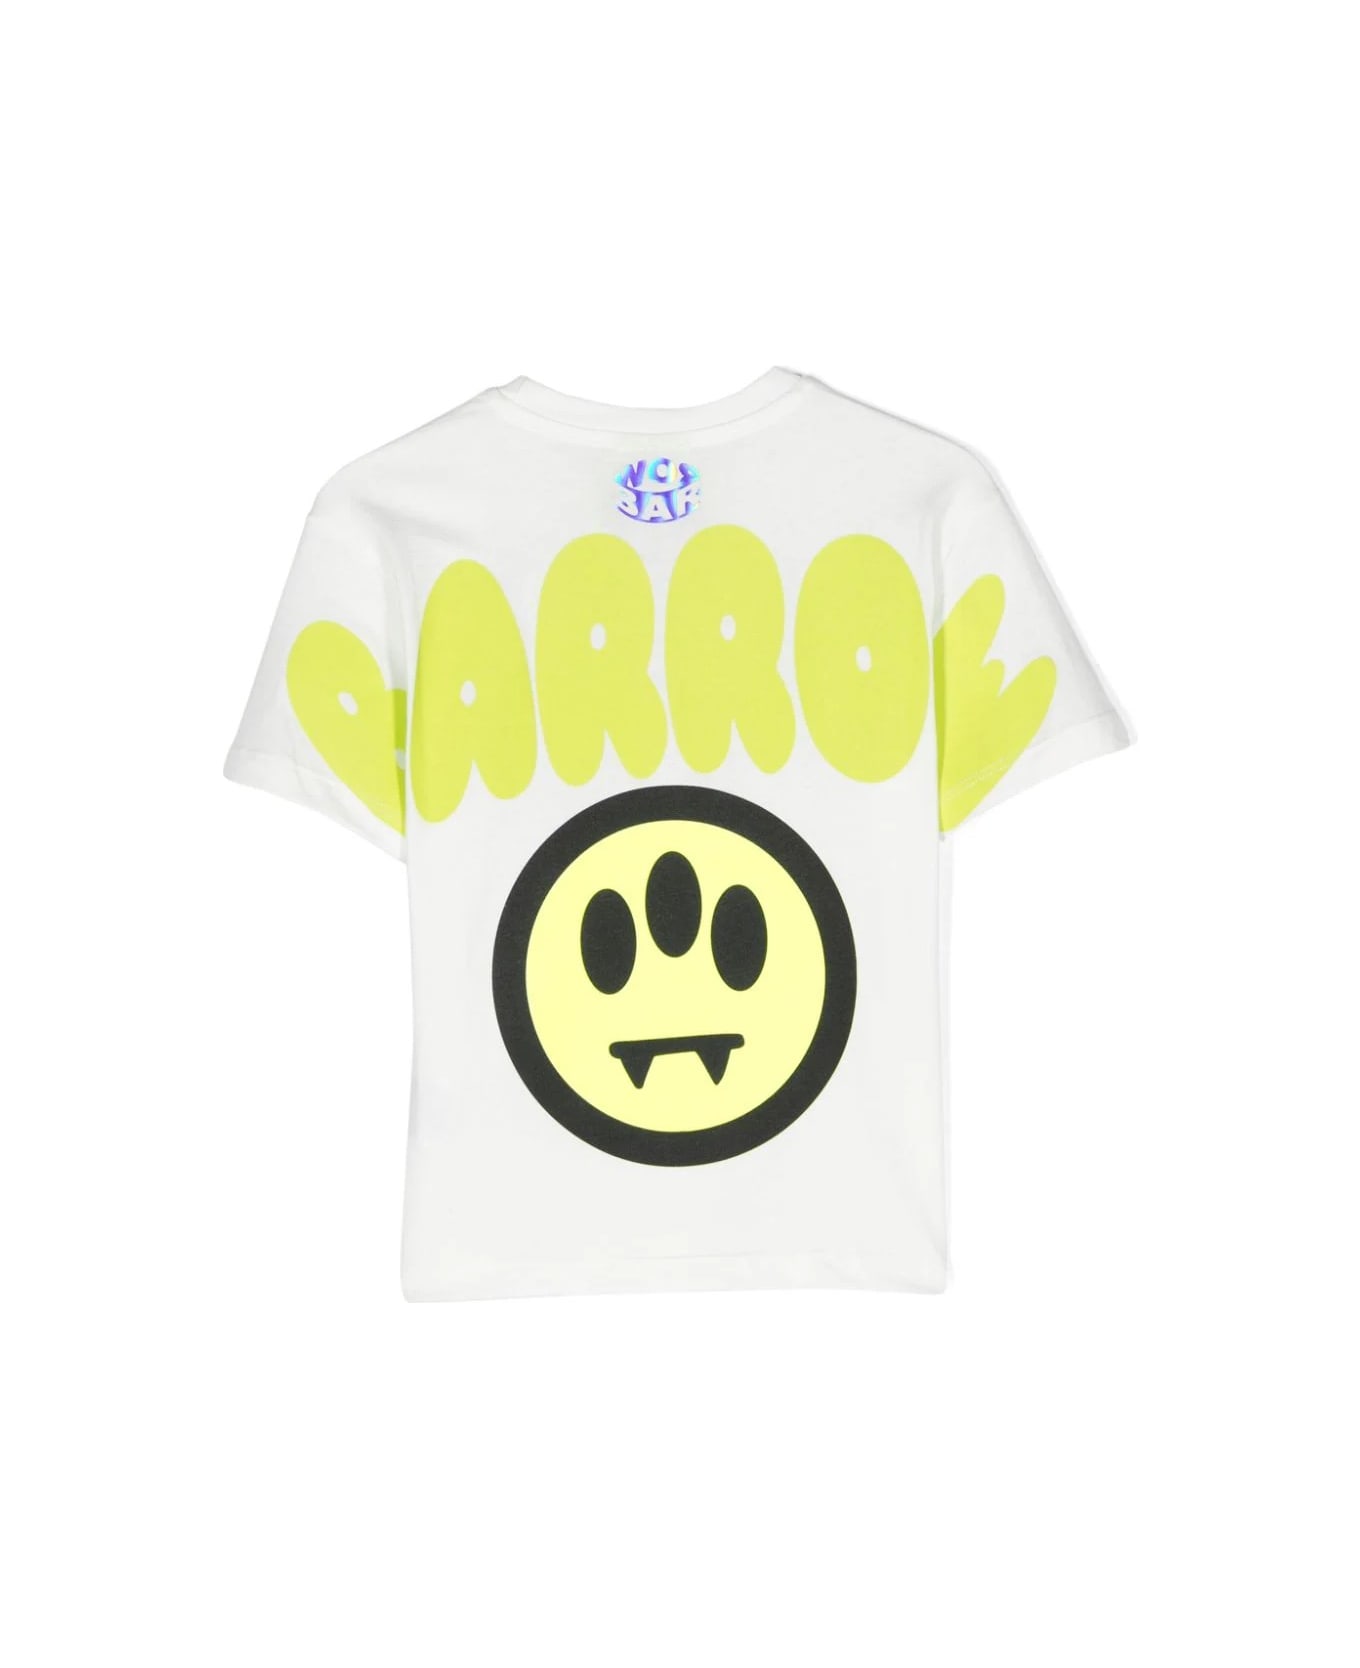 Barrow White T-shirt With Front And Back Logo - White